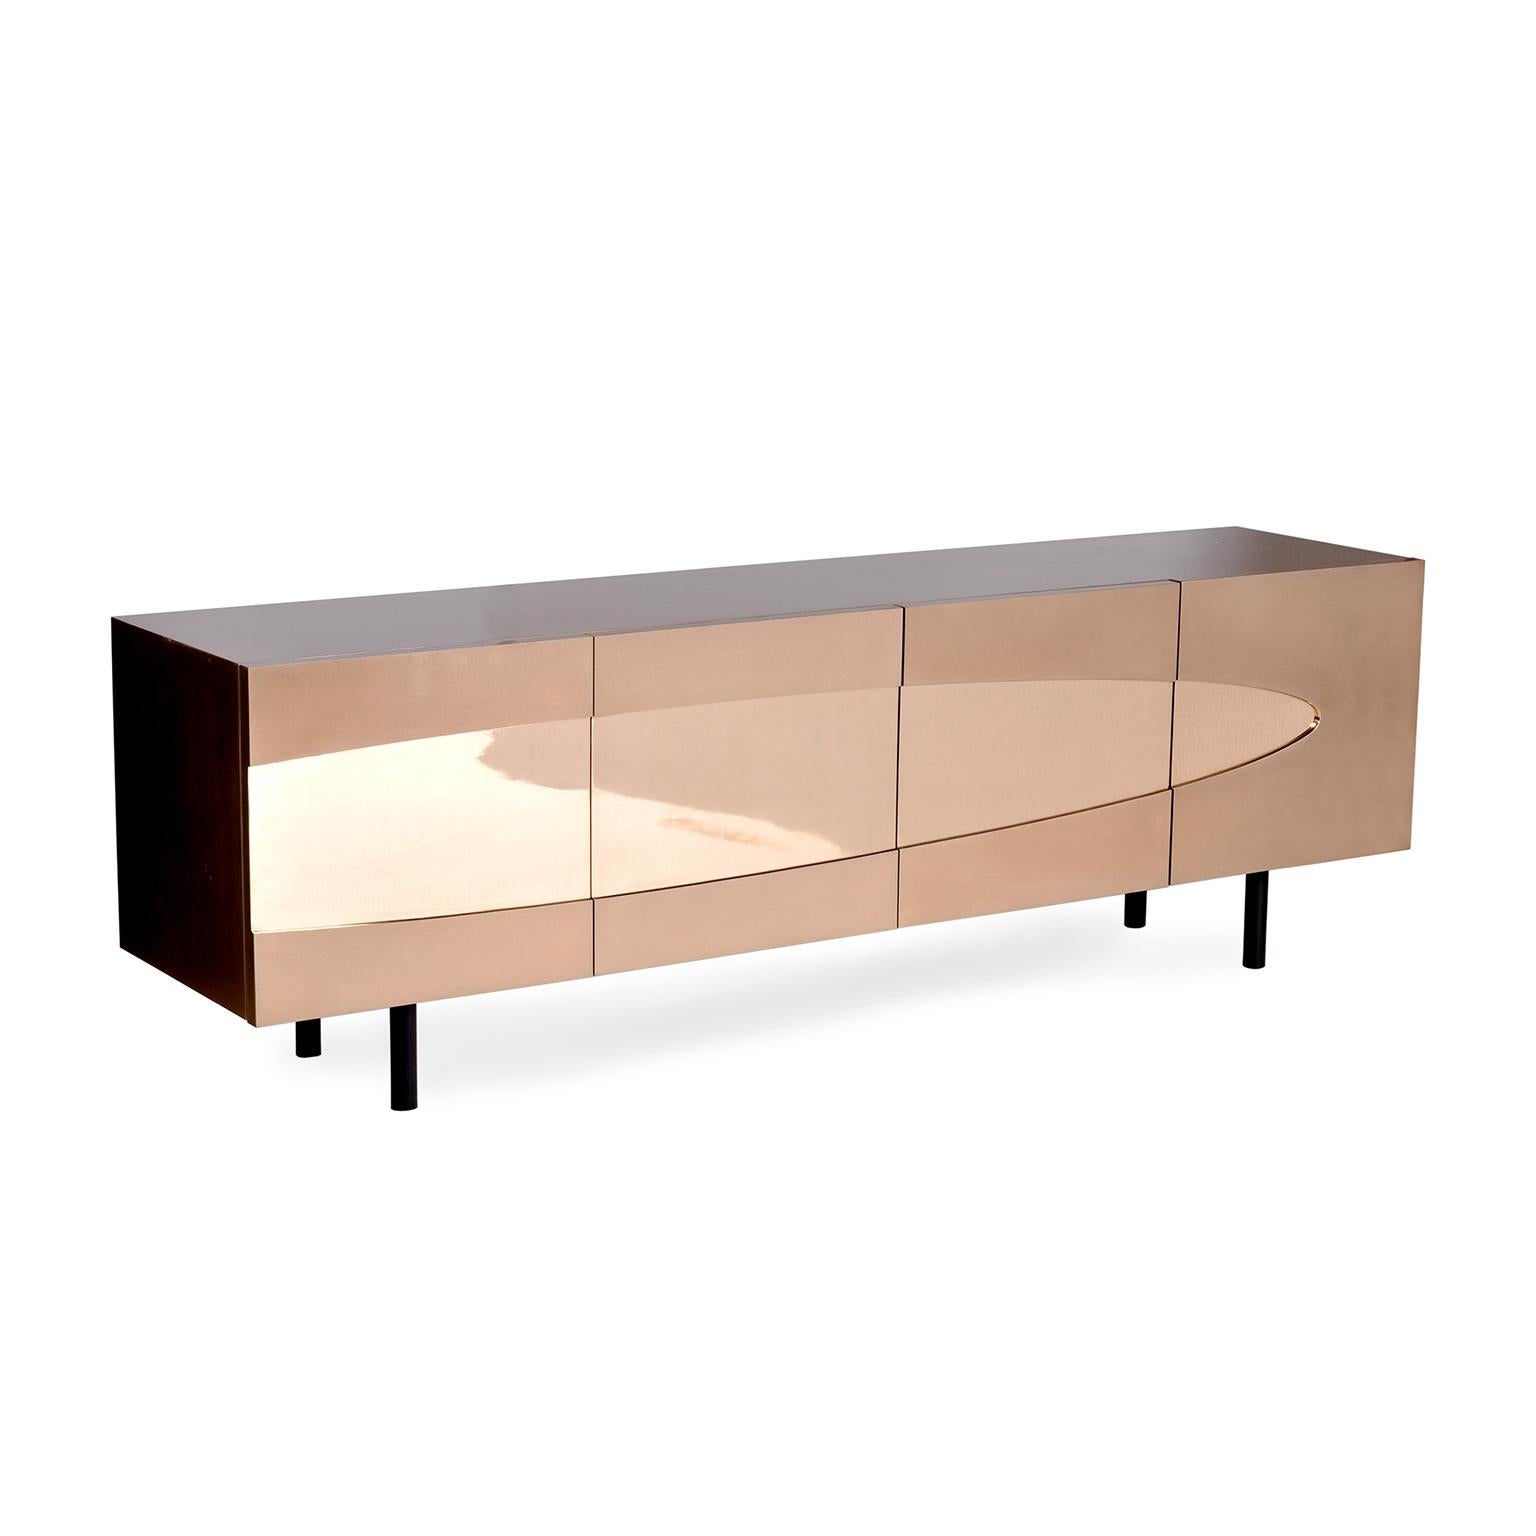 Our Ellipse series is all about the effect positive and negative shapes have on our perception of form. The Ellipse Sideboard is clad entirely in Bronze with a polished bronze center ellipse and a satin bronze case and doors. The interior is a